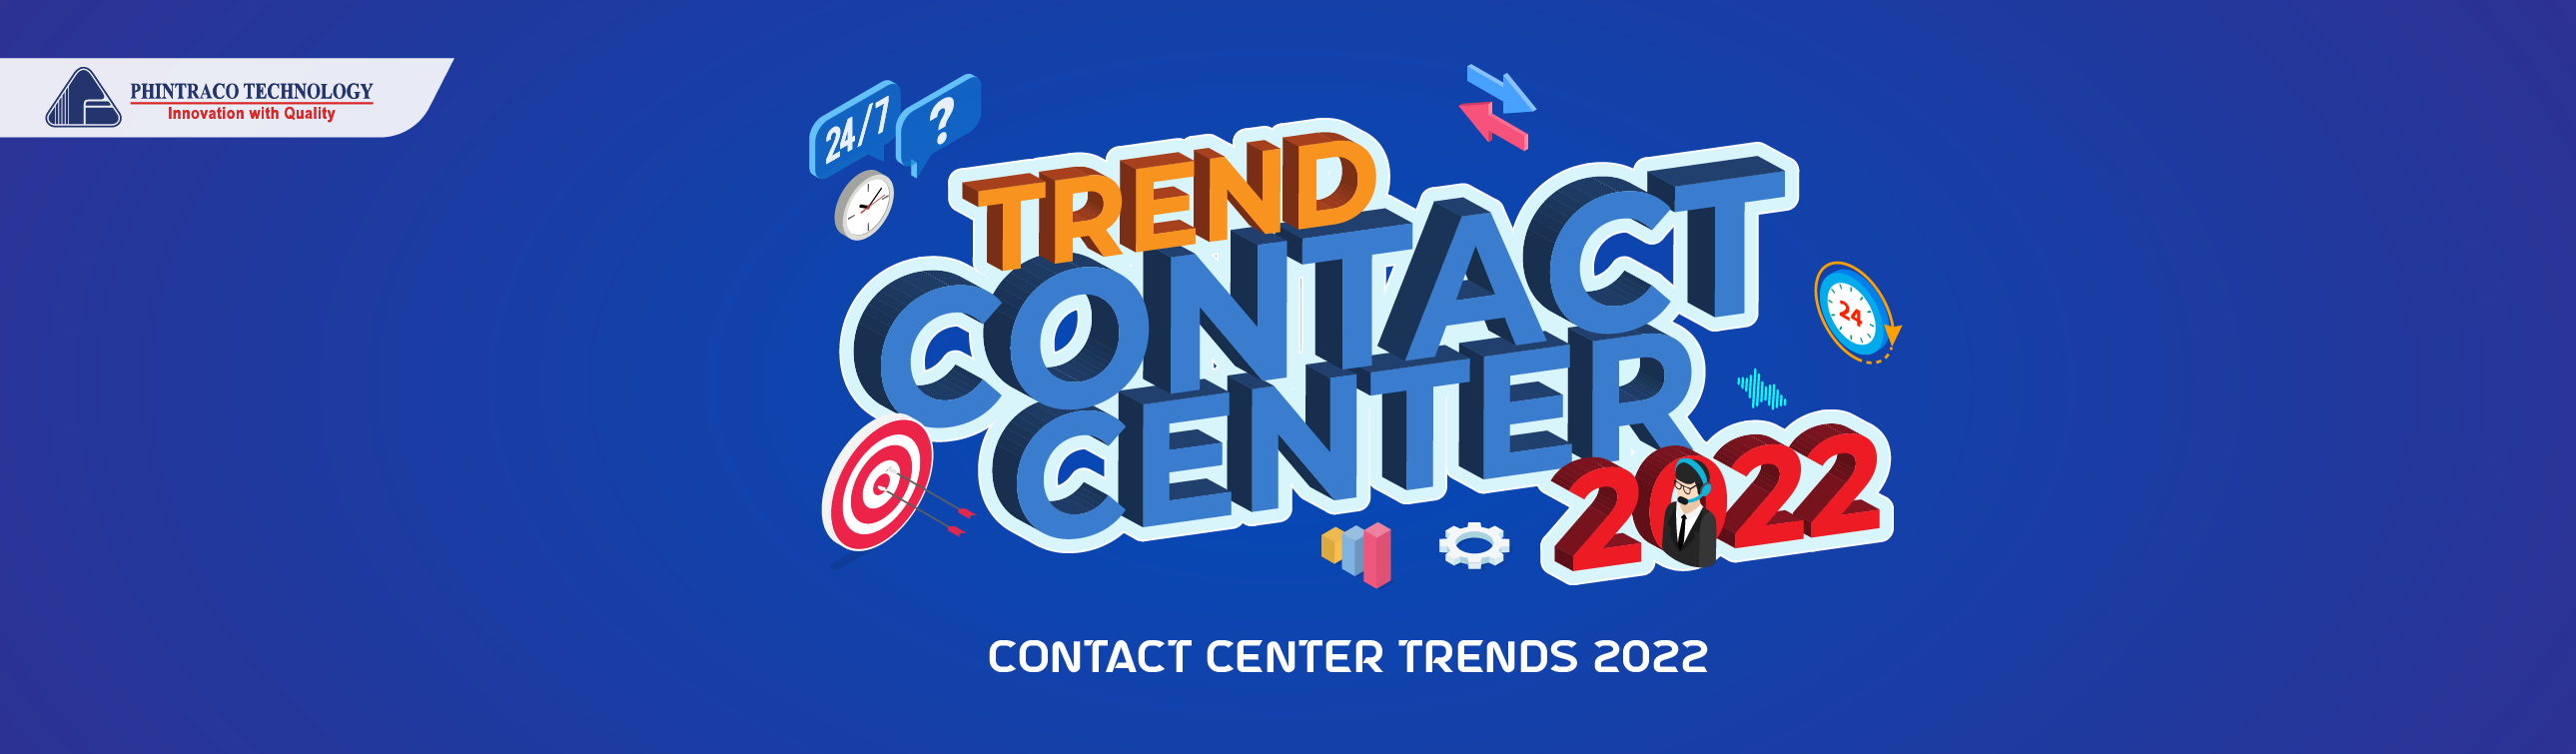 contact center trends 2022